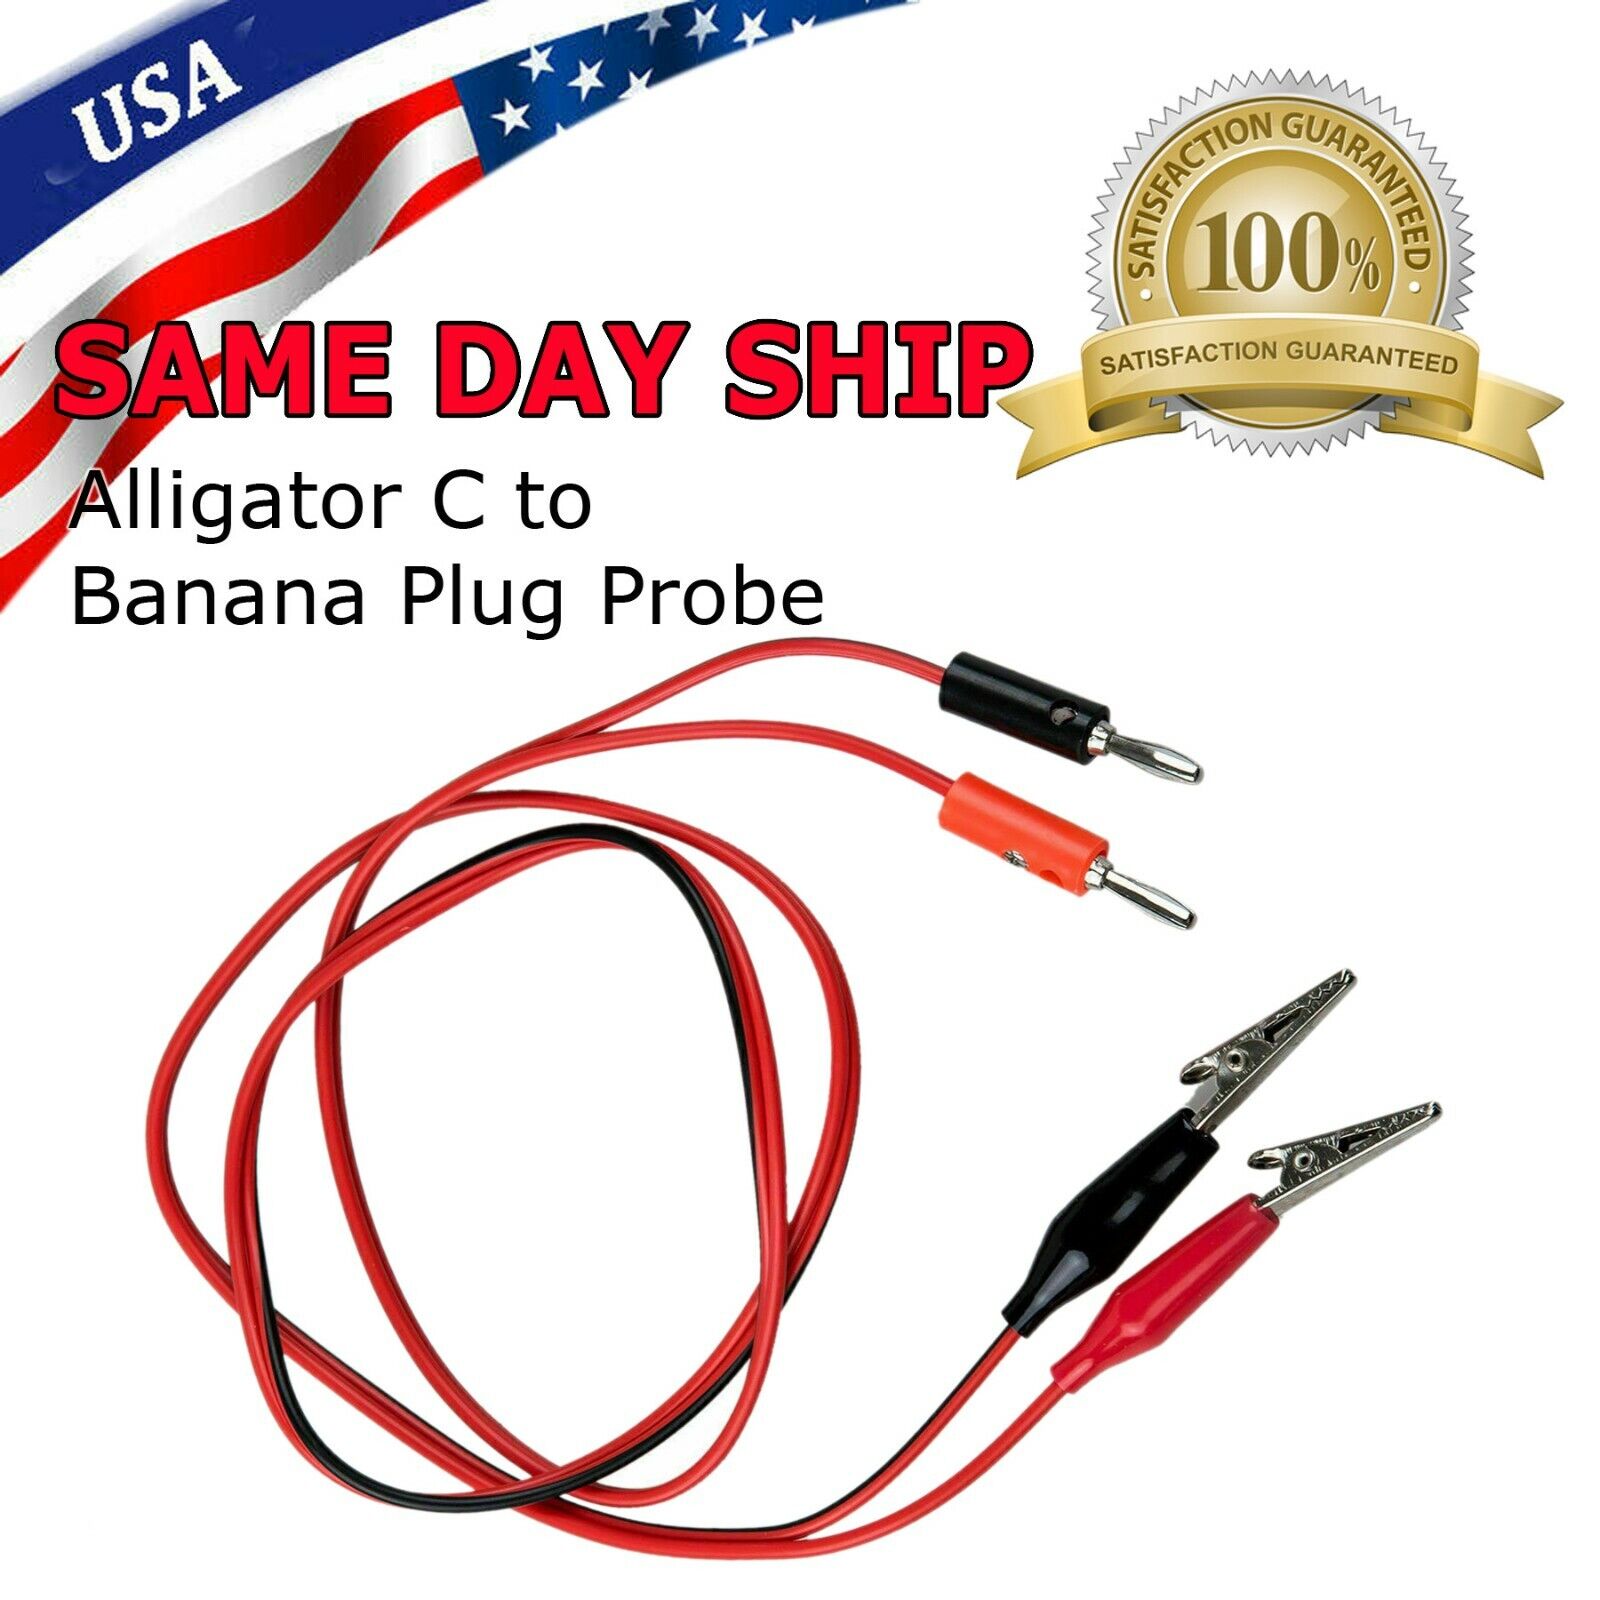 New 3FT Alligator Probe Test Lead Clip to Banana Plug Probe Cable for Multimeter